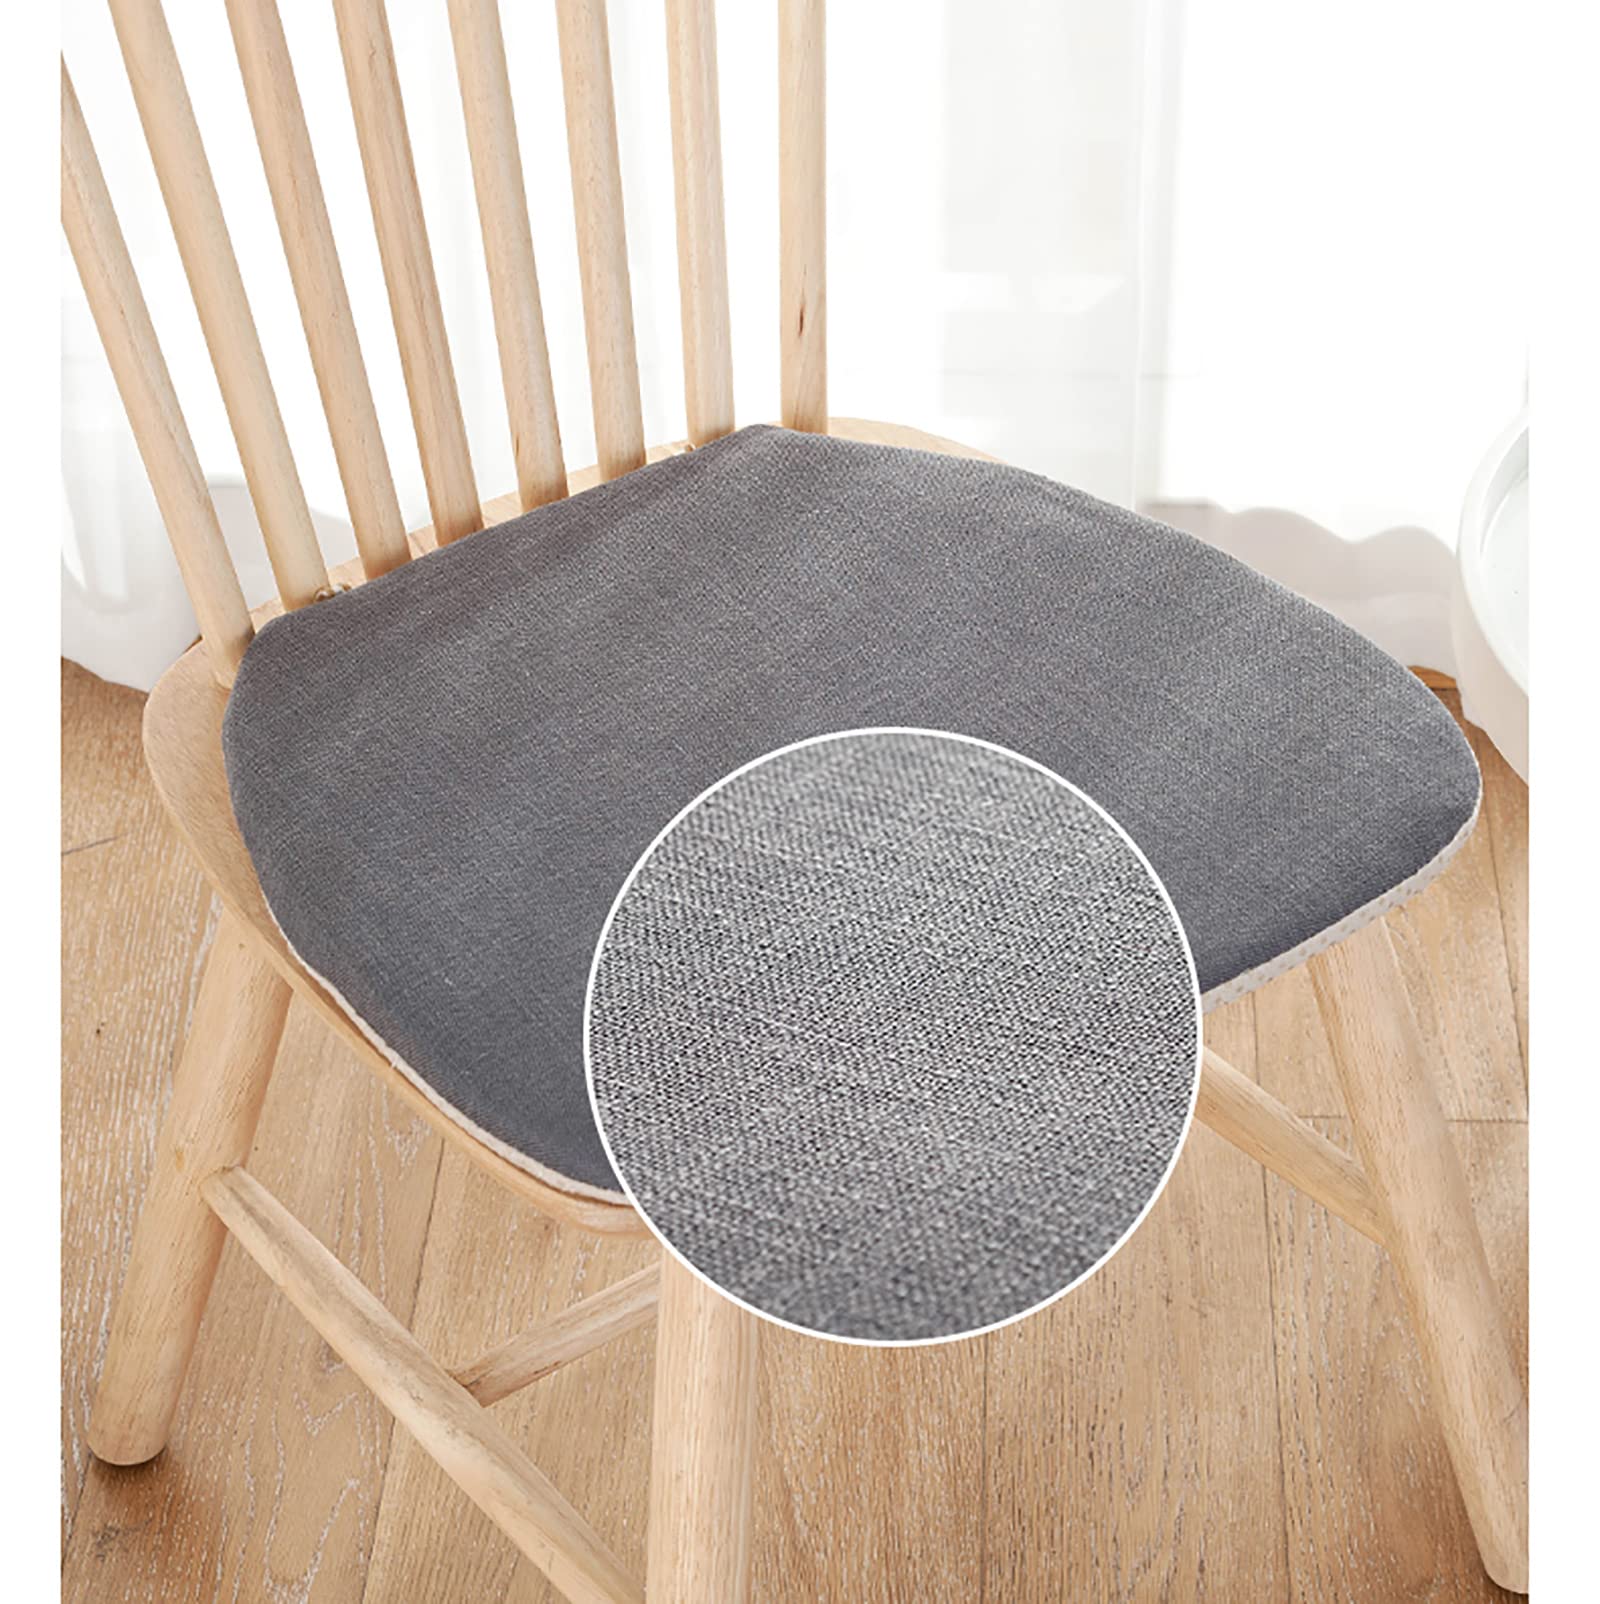 Cotton Linen Chair Cushion with Ties,Home Kitchen Chair Pad Soft Non Slip Seat Pad with Washable Cover,Dining Seat Cushion for Office Living Room Car Sitting Chair Pads-Dark gray 50x50cm(20x20inch)